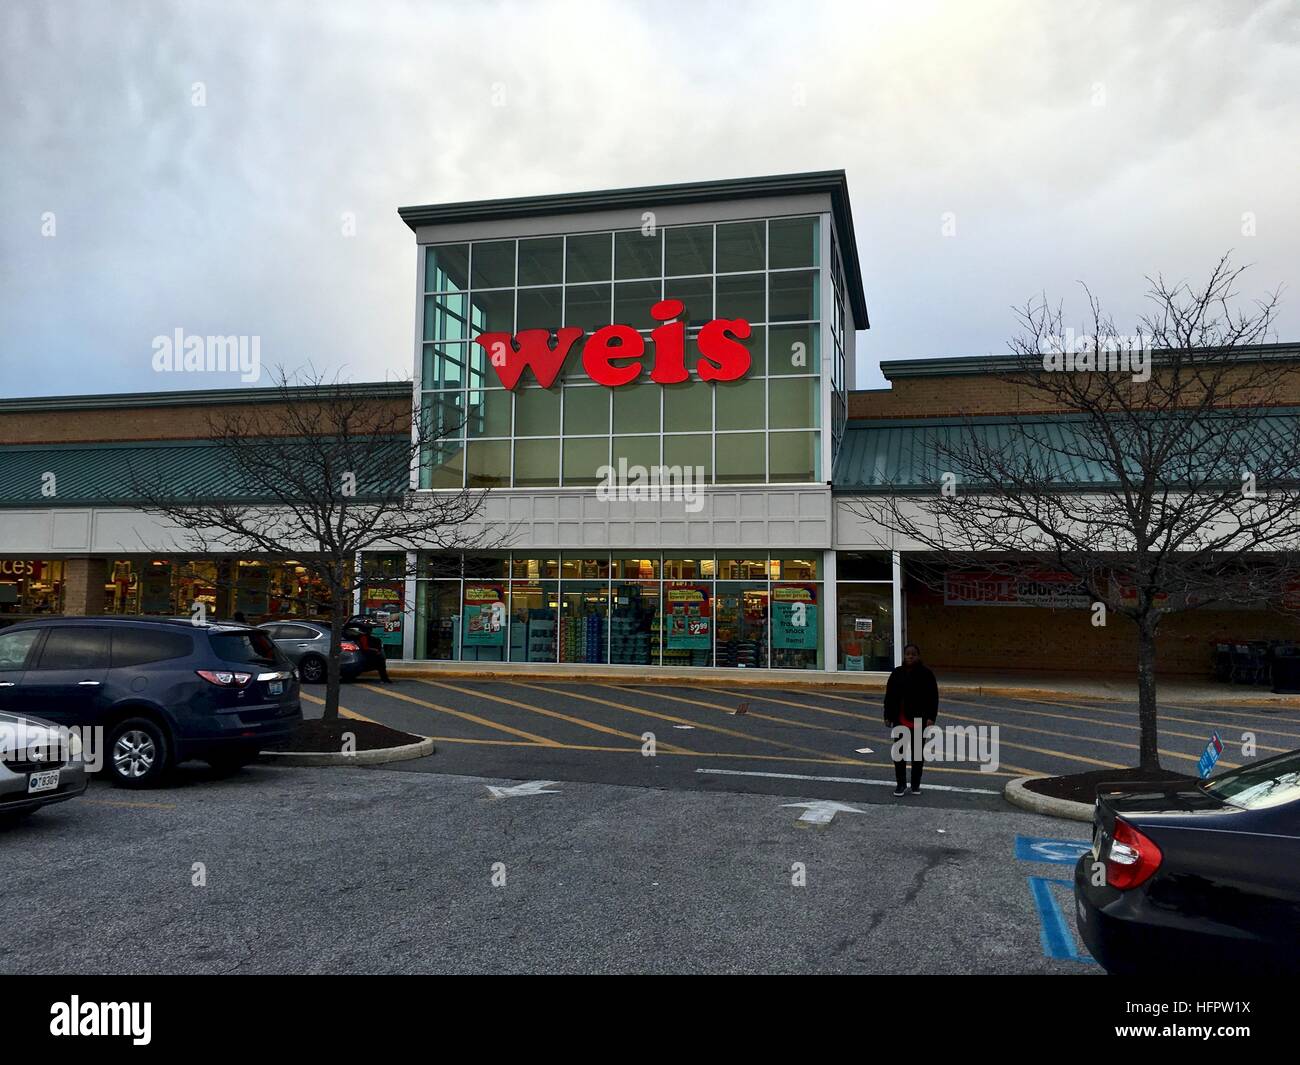 https://c8.alamy.com/comp/HFPW1X/the-storefront-of-a-weis-grocery-store-HFPW1X.jpg